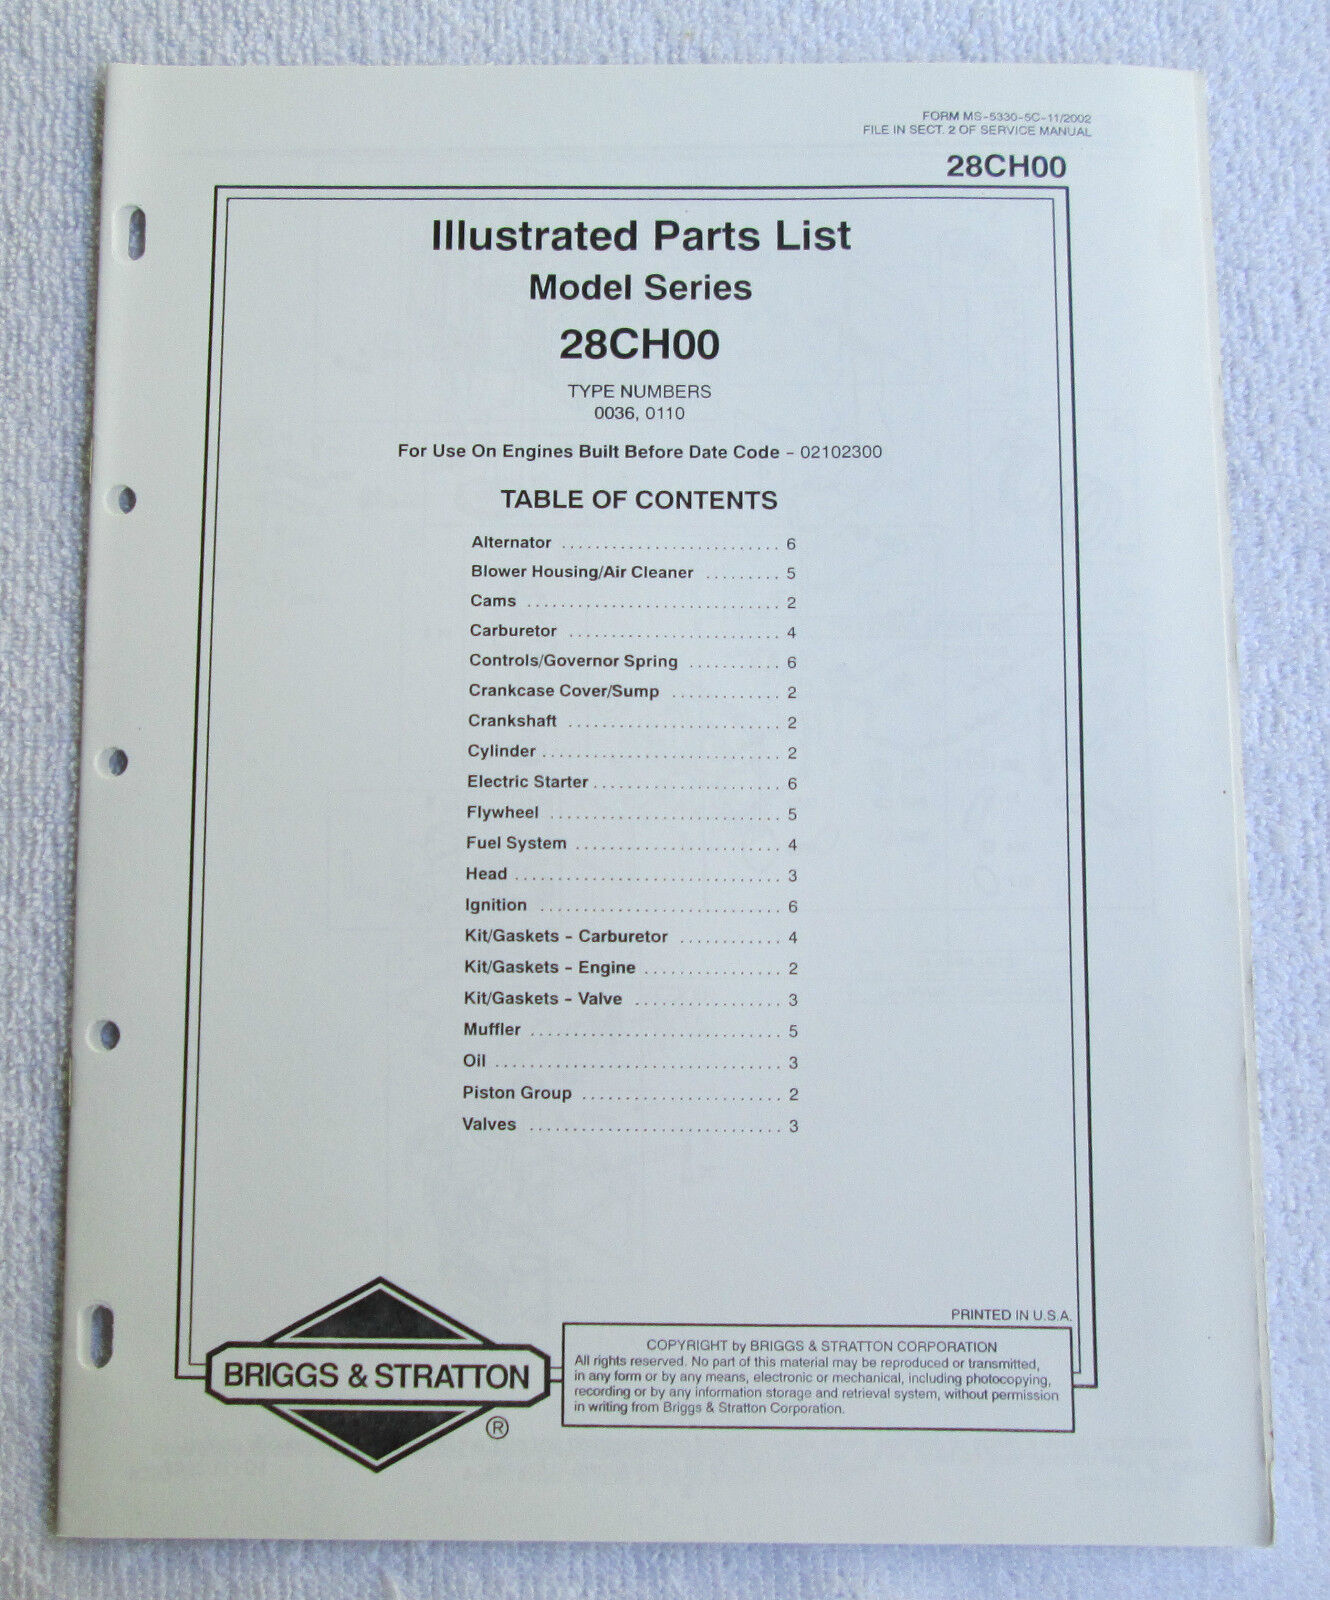 Briggs & Stratton Engines Illustrated Parts List Model Series 28CH00 USA Manual